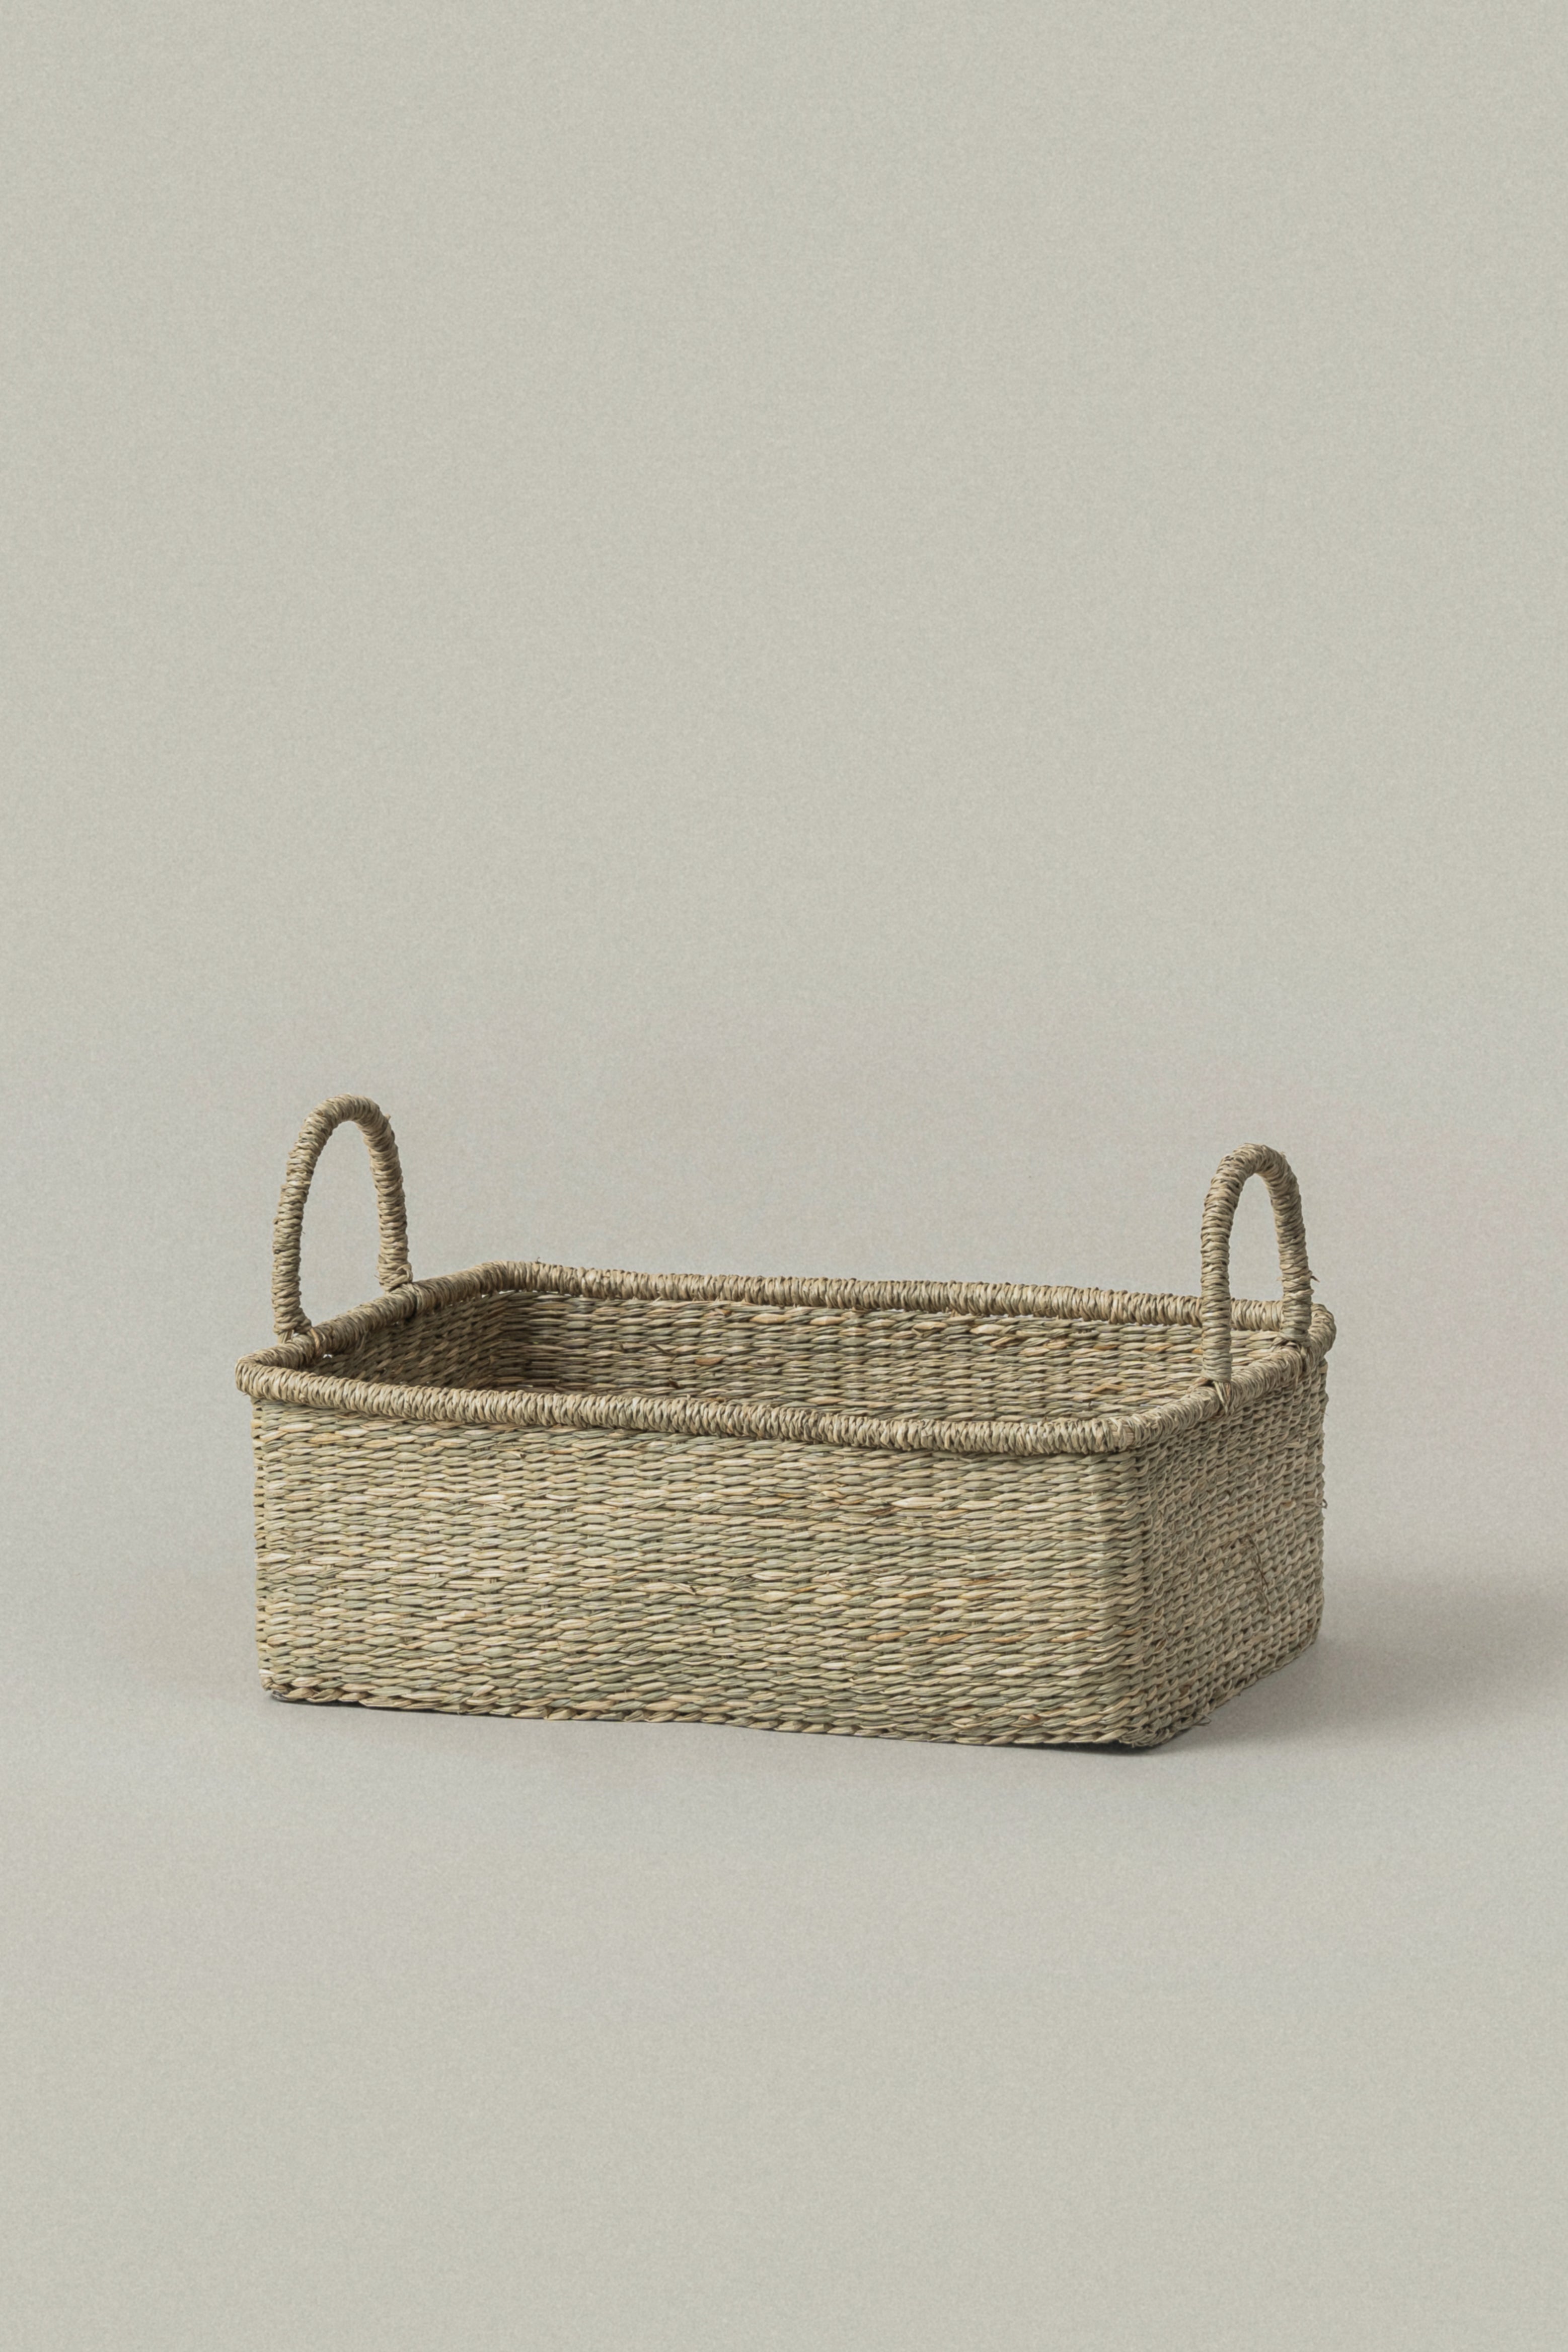 Large Lima Rectangular Seagrass Basket with Handles - Large Lima Rectangular Seagrass Basket with Handles